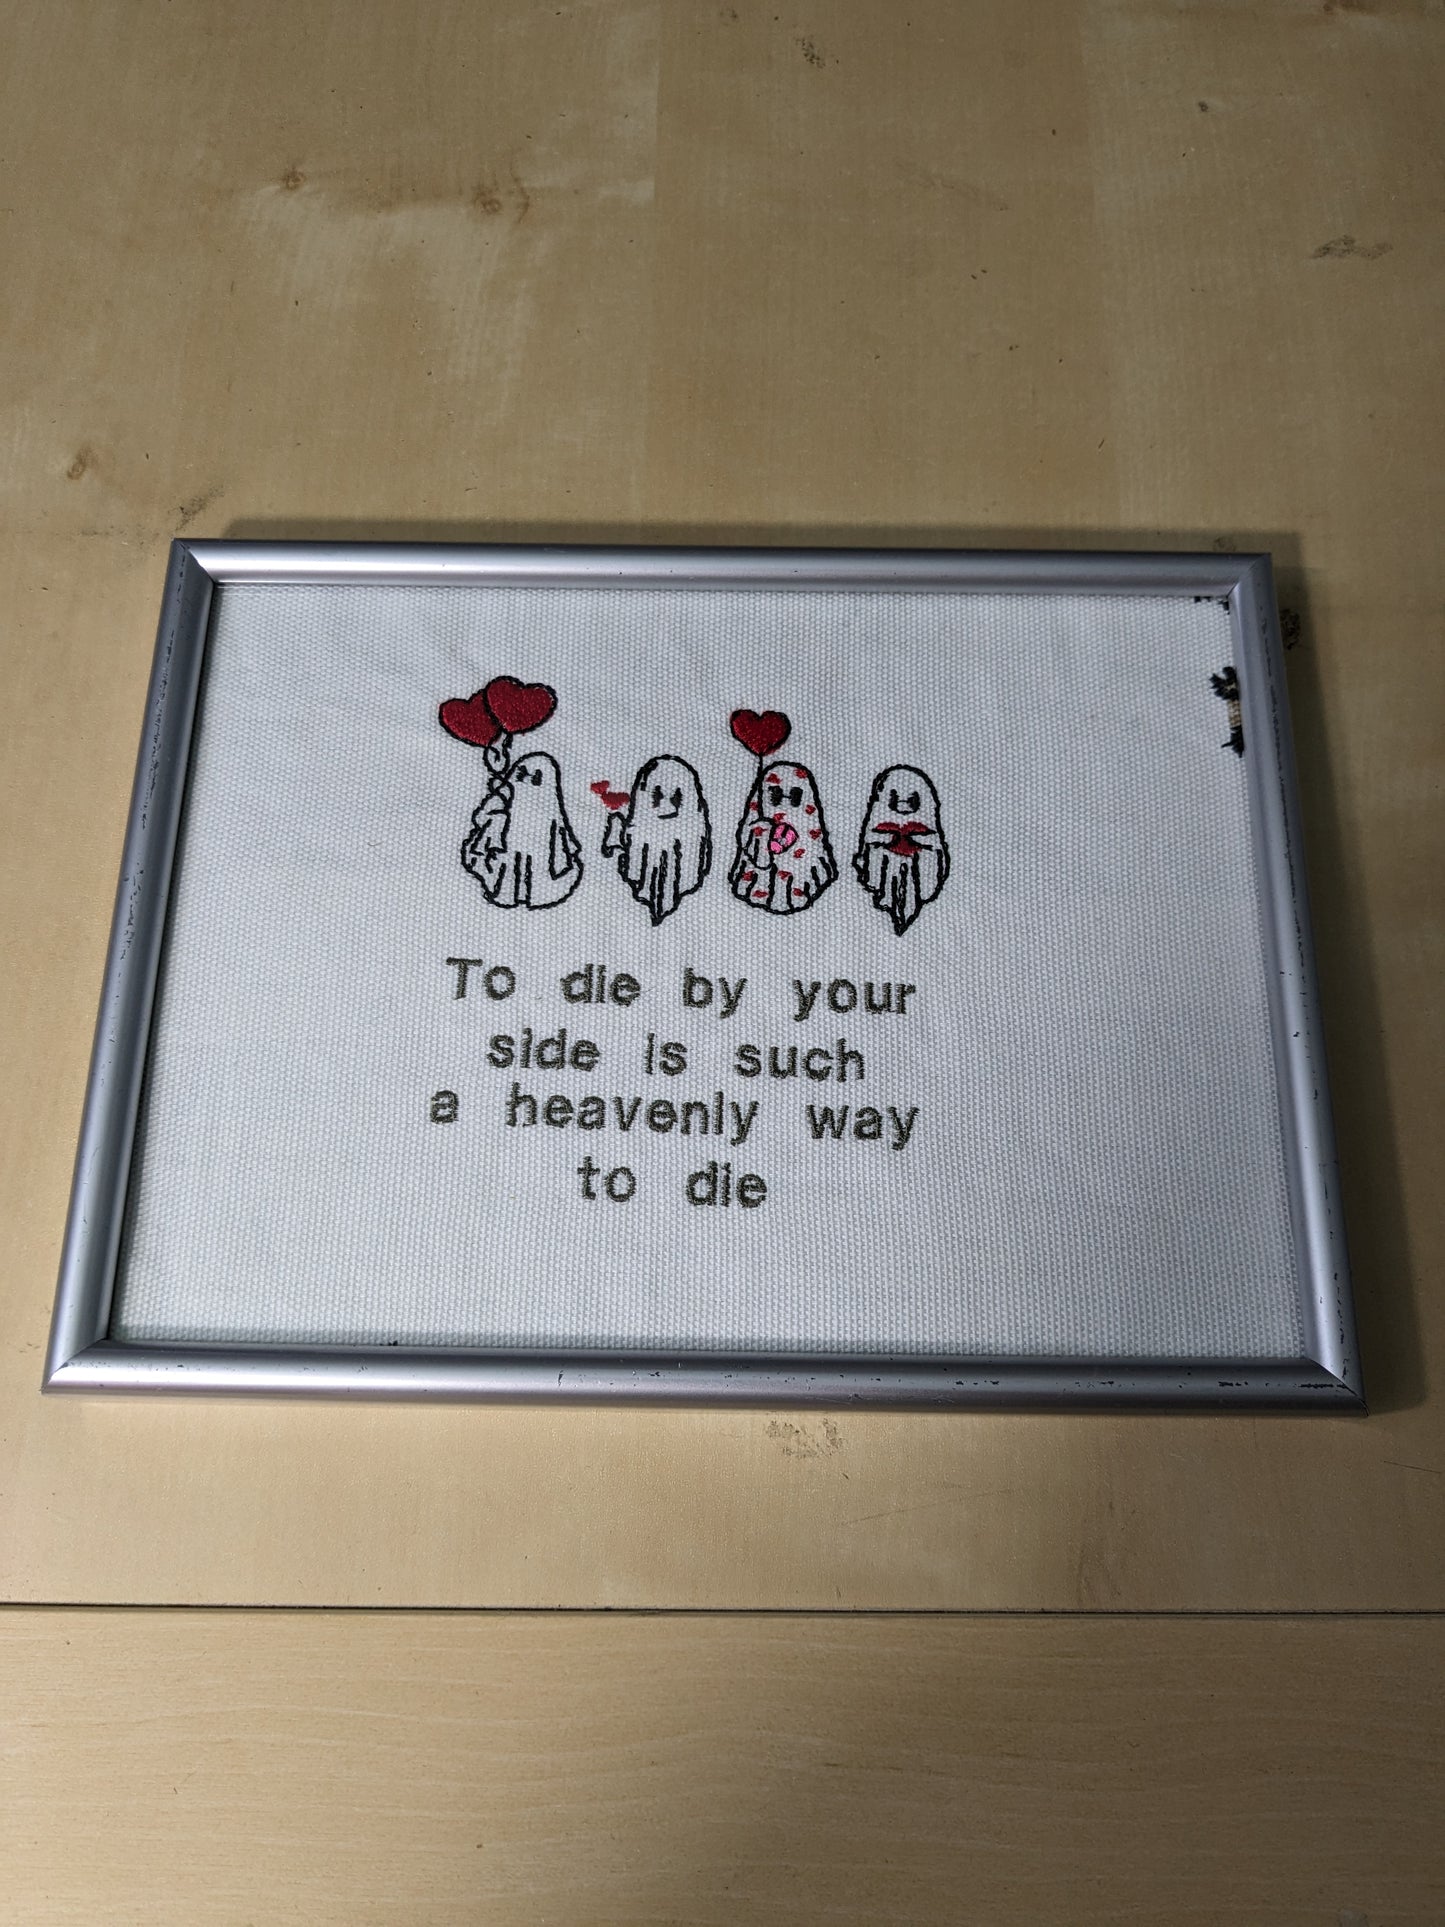 The Smiths Inspired Embroidery Art - Framed Artwork - Ghost Illustrations - Gothic Valentine's Day